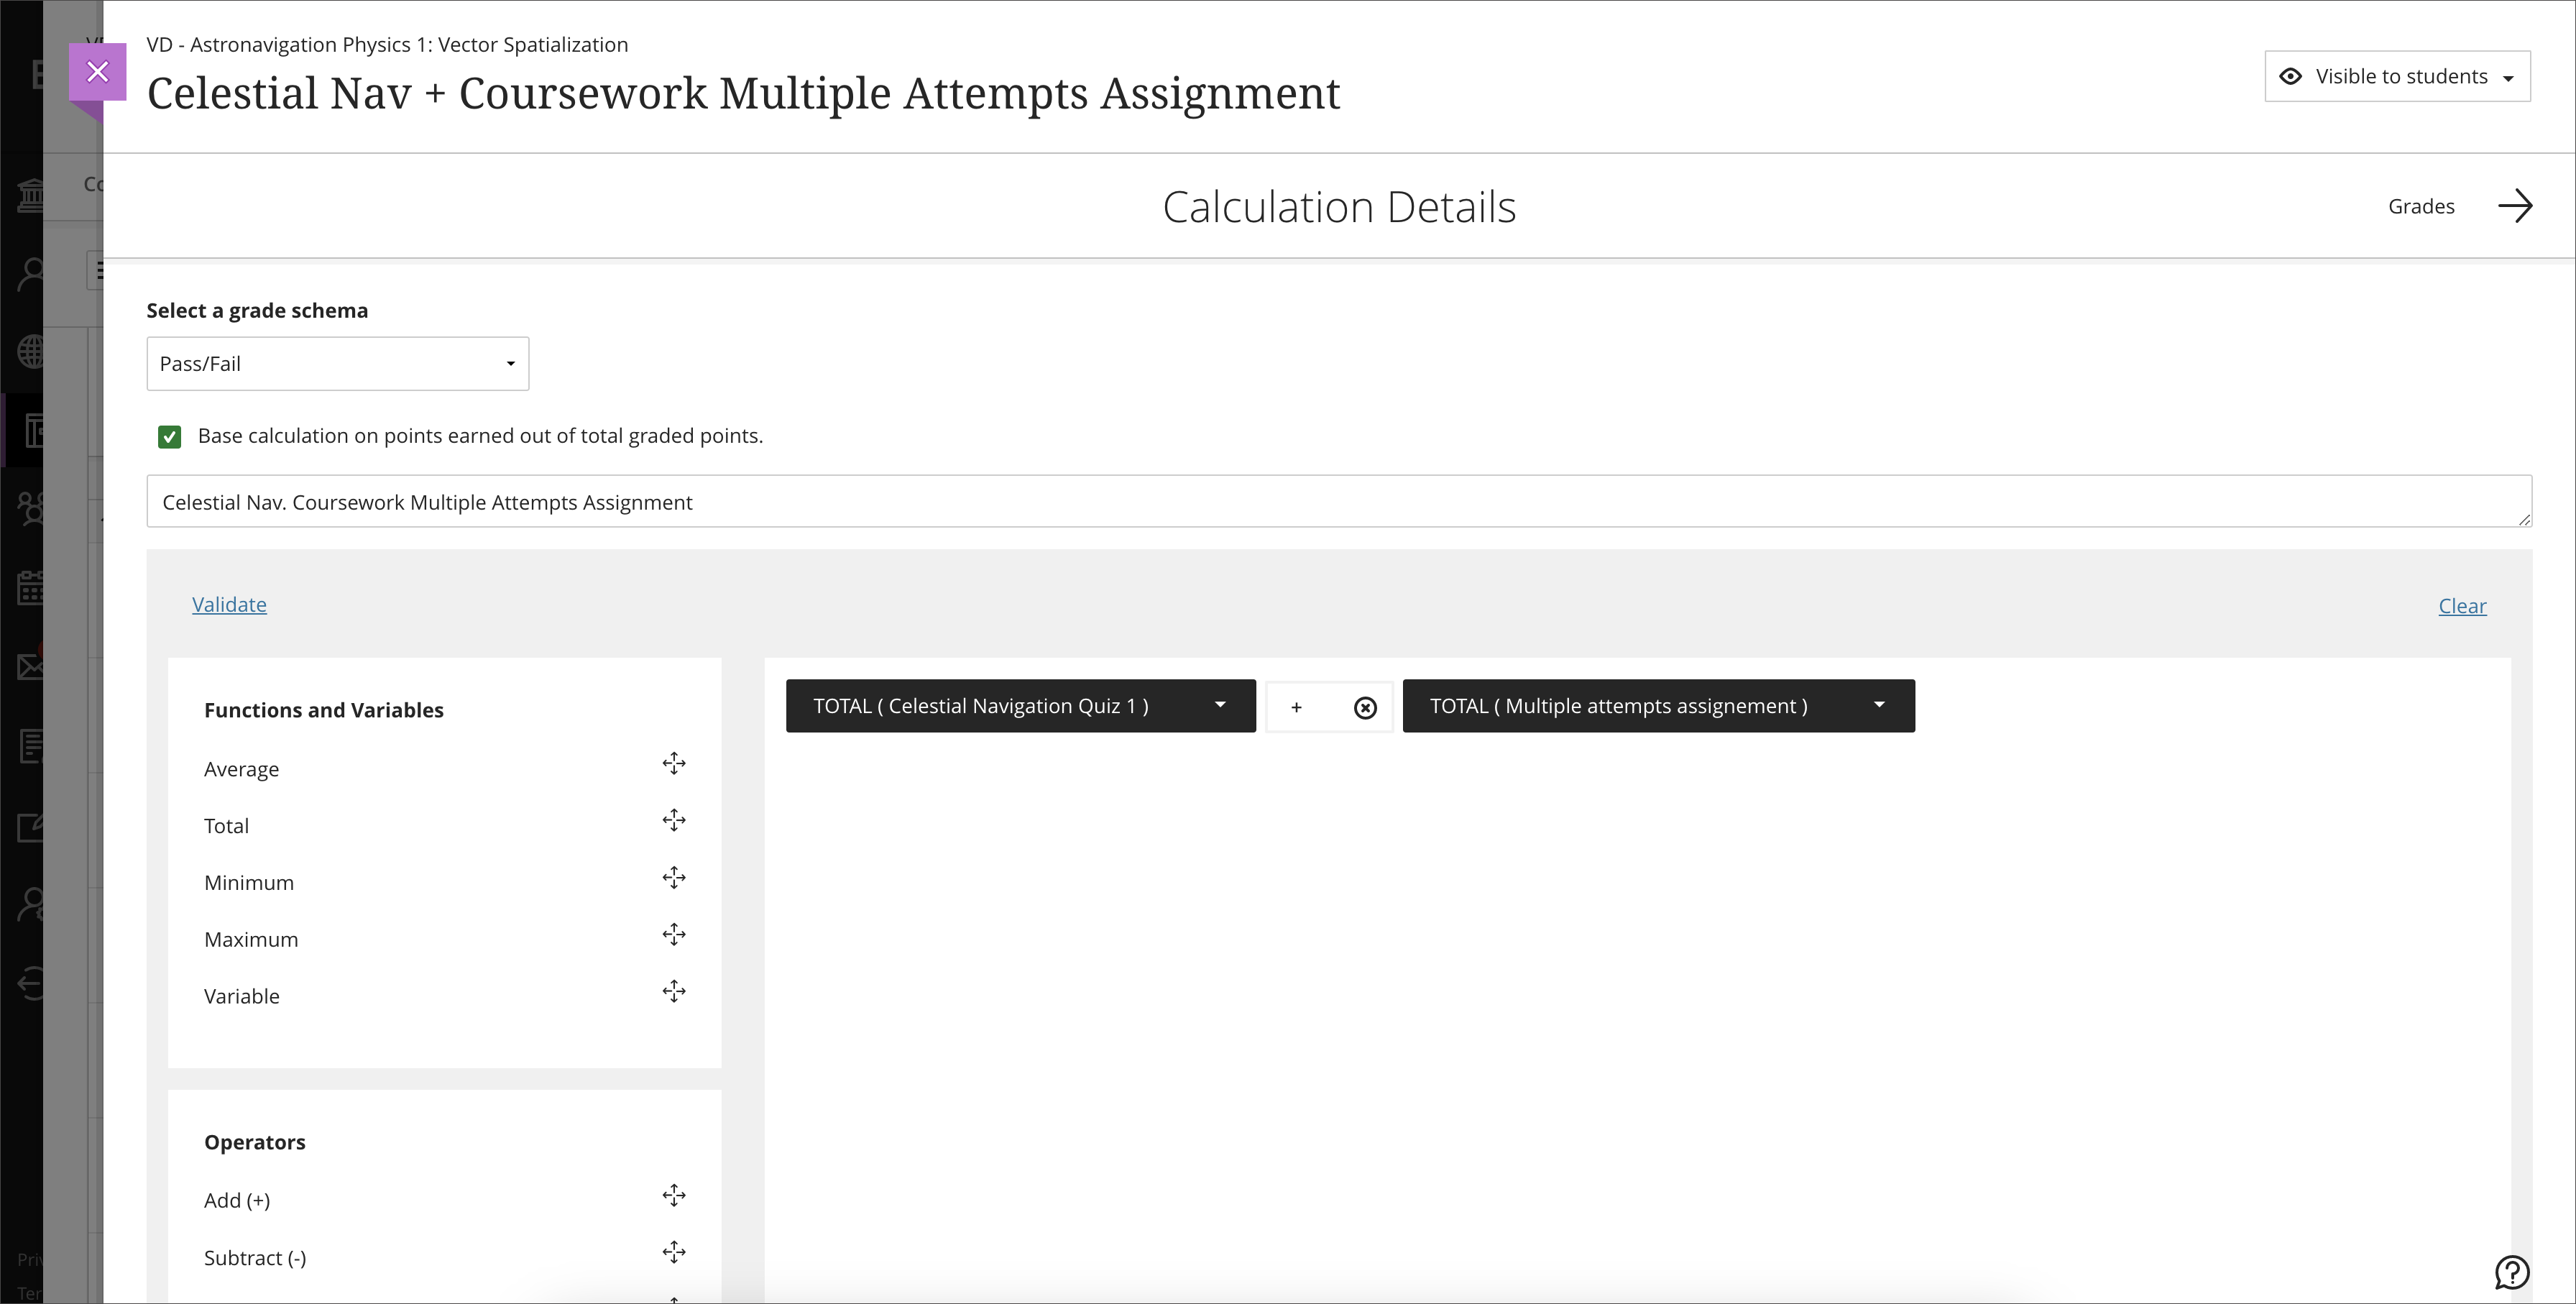 Option to include 'Base calculation on points earned out of total graded points' option for any gradebook calculation